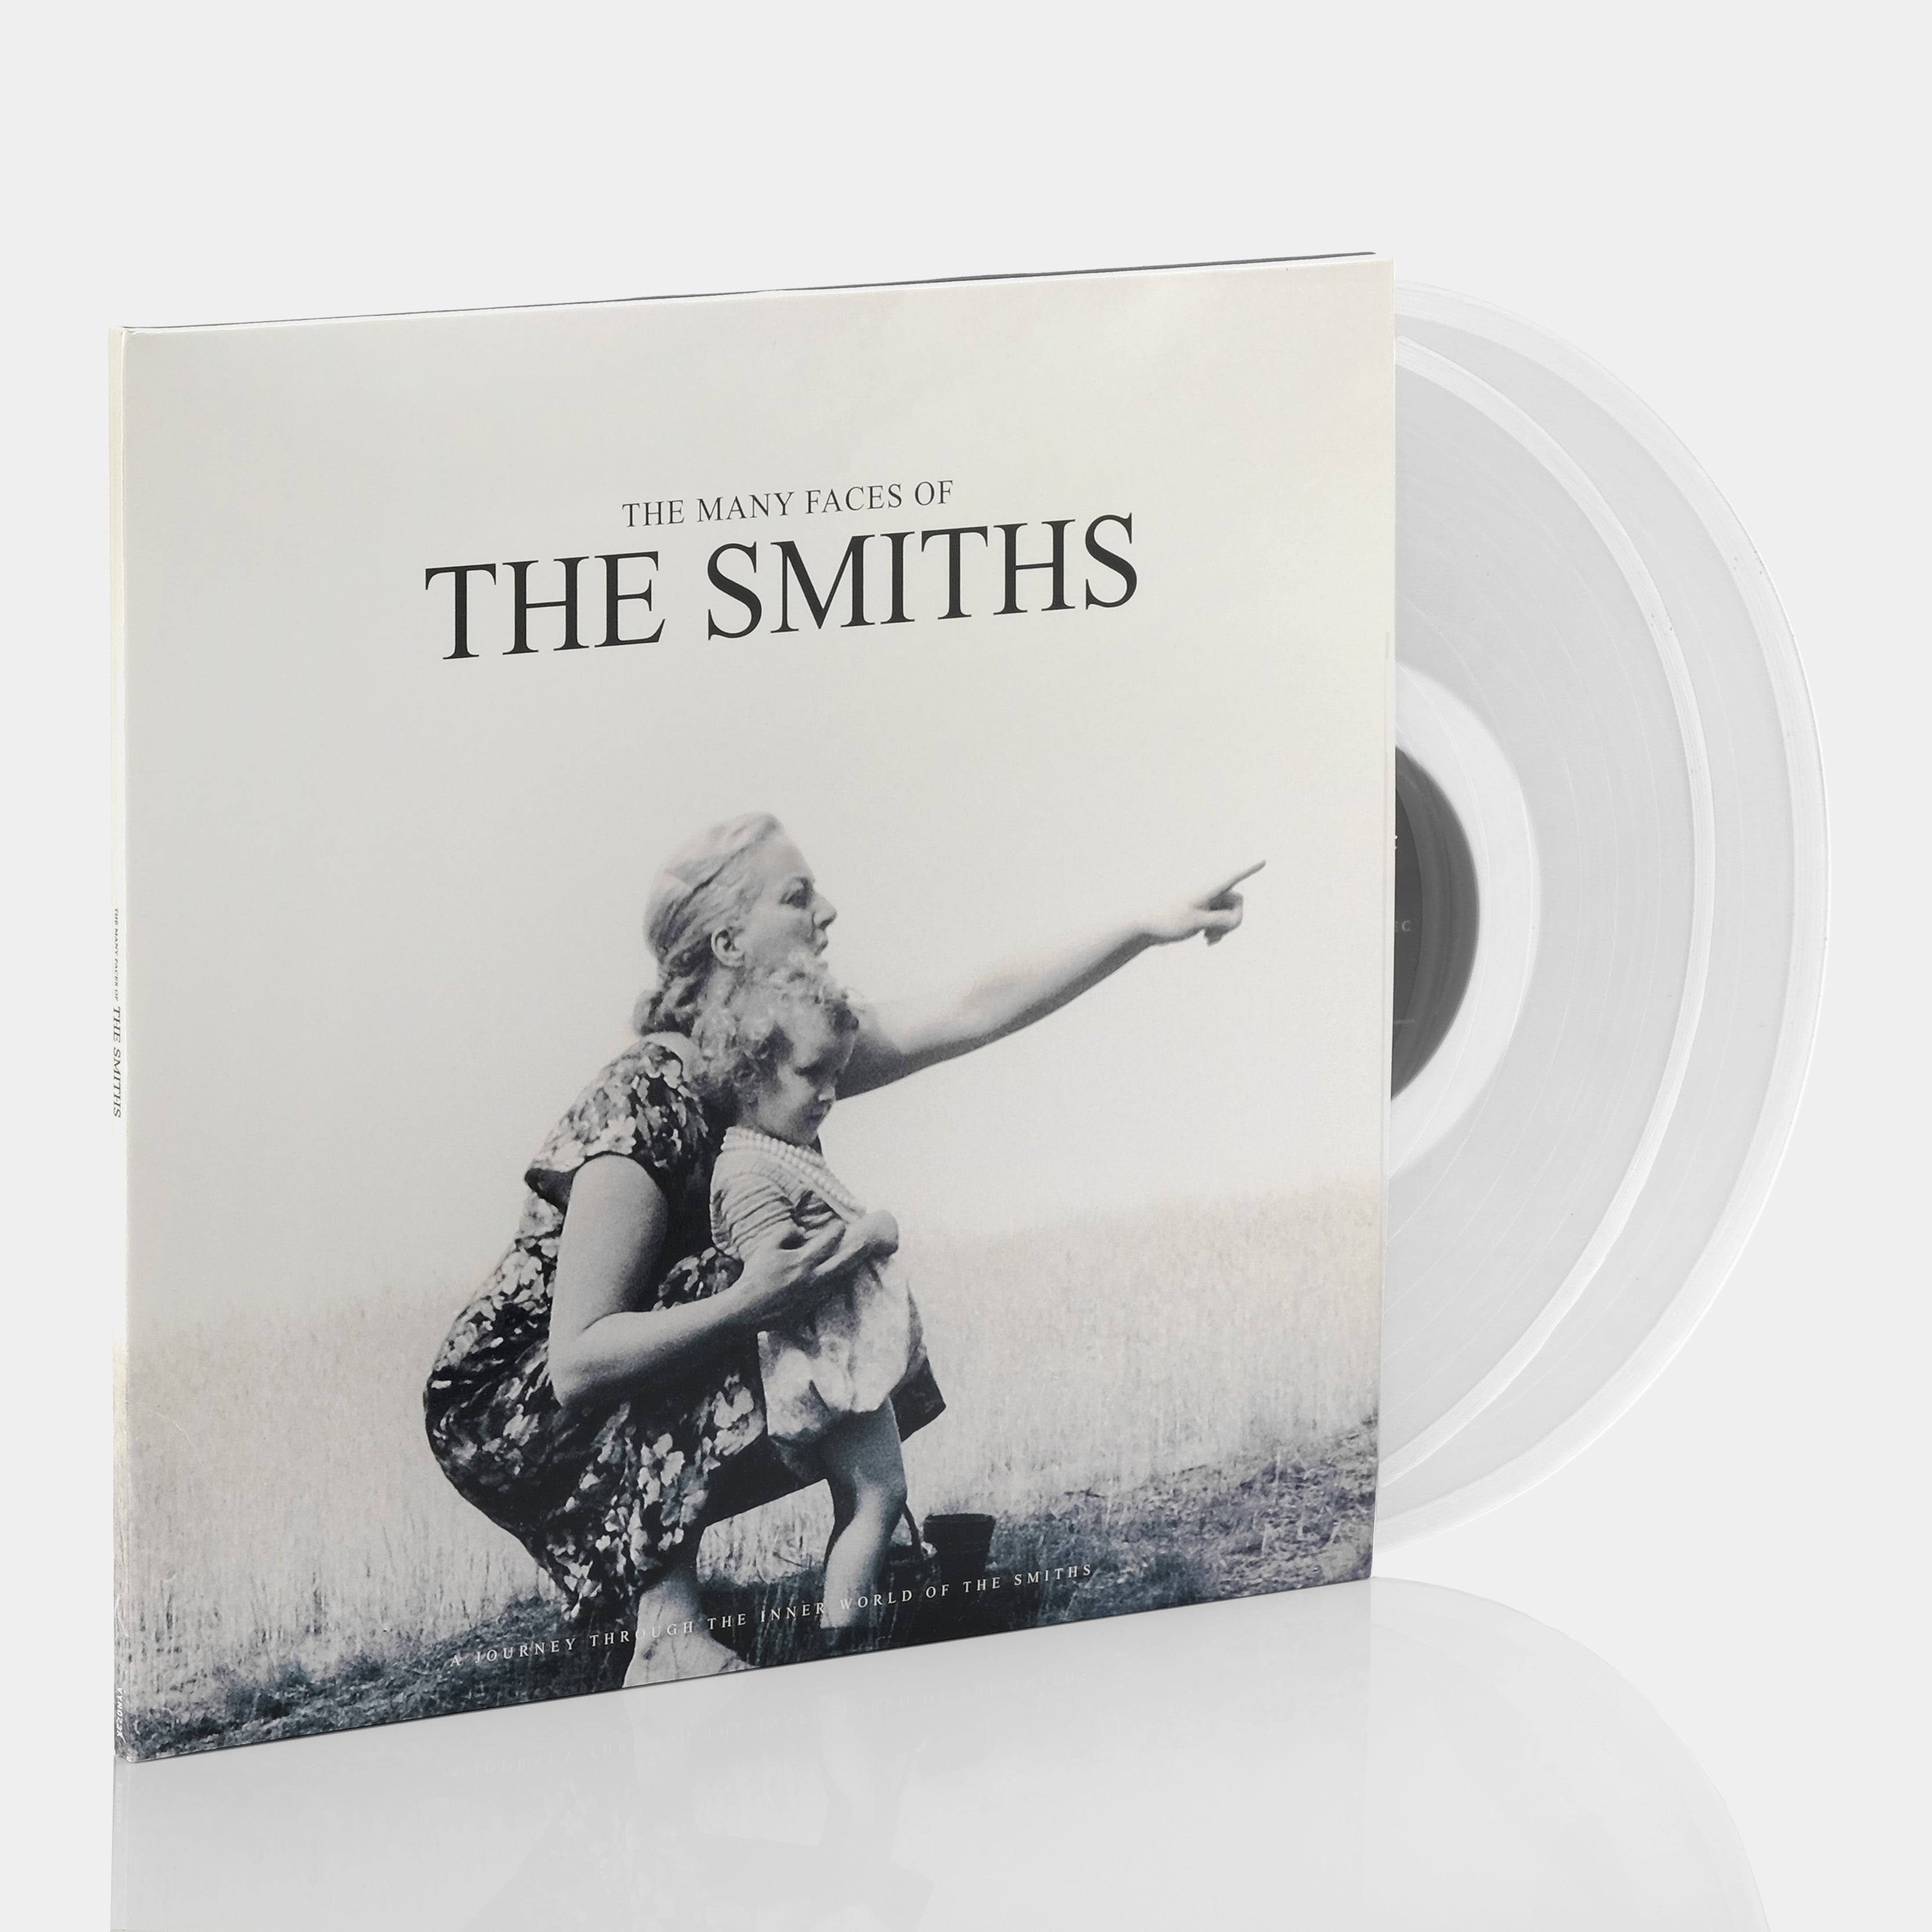 The Smiths - The Many Faces of the Smiths 2xLP Clear Vinyl Record